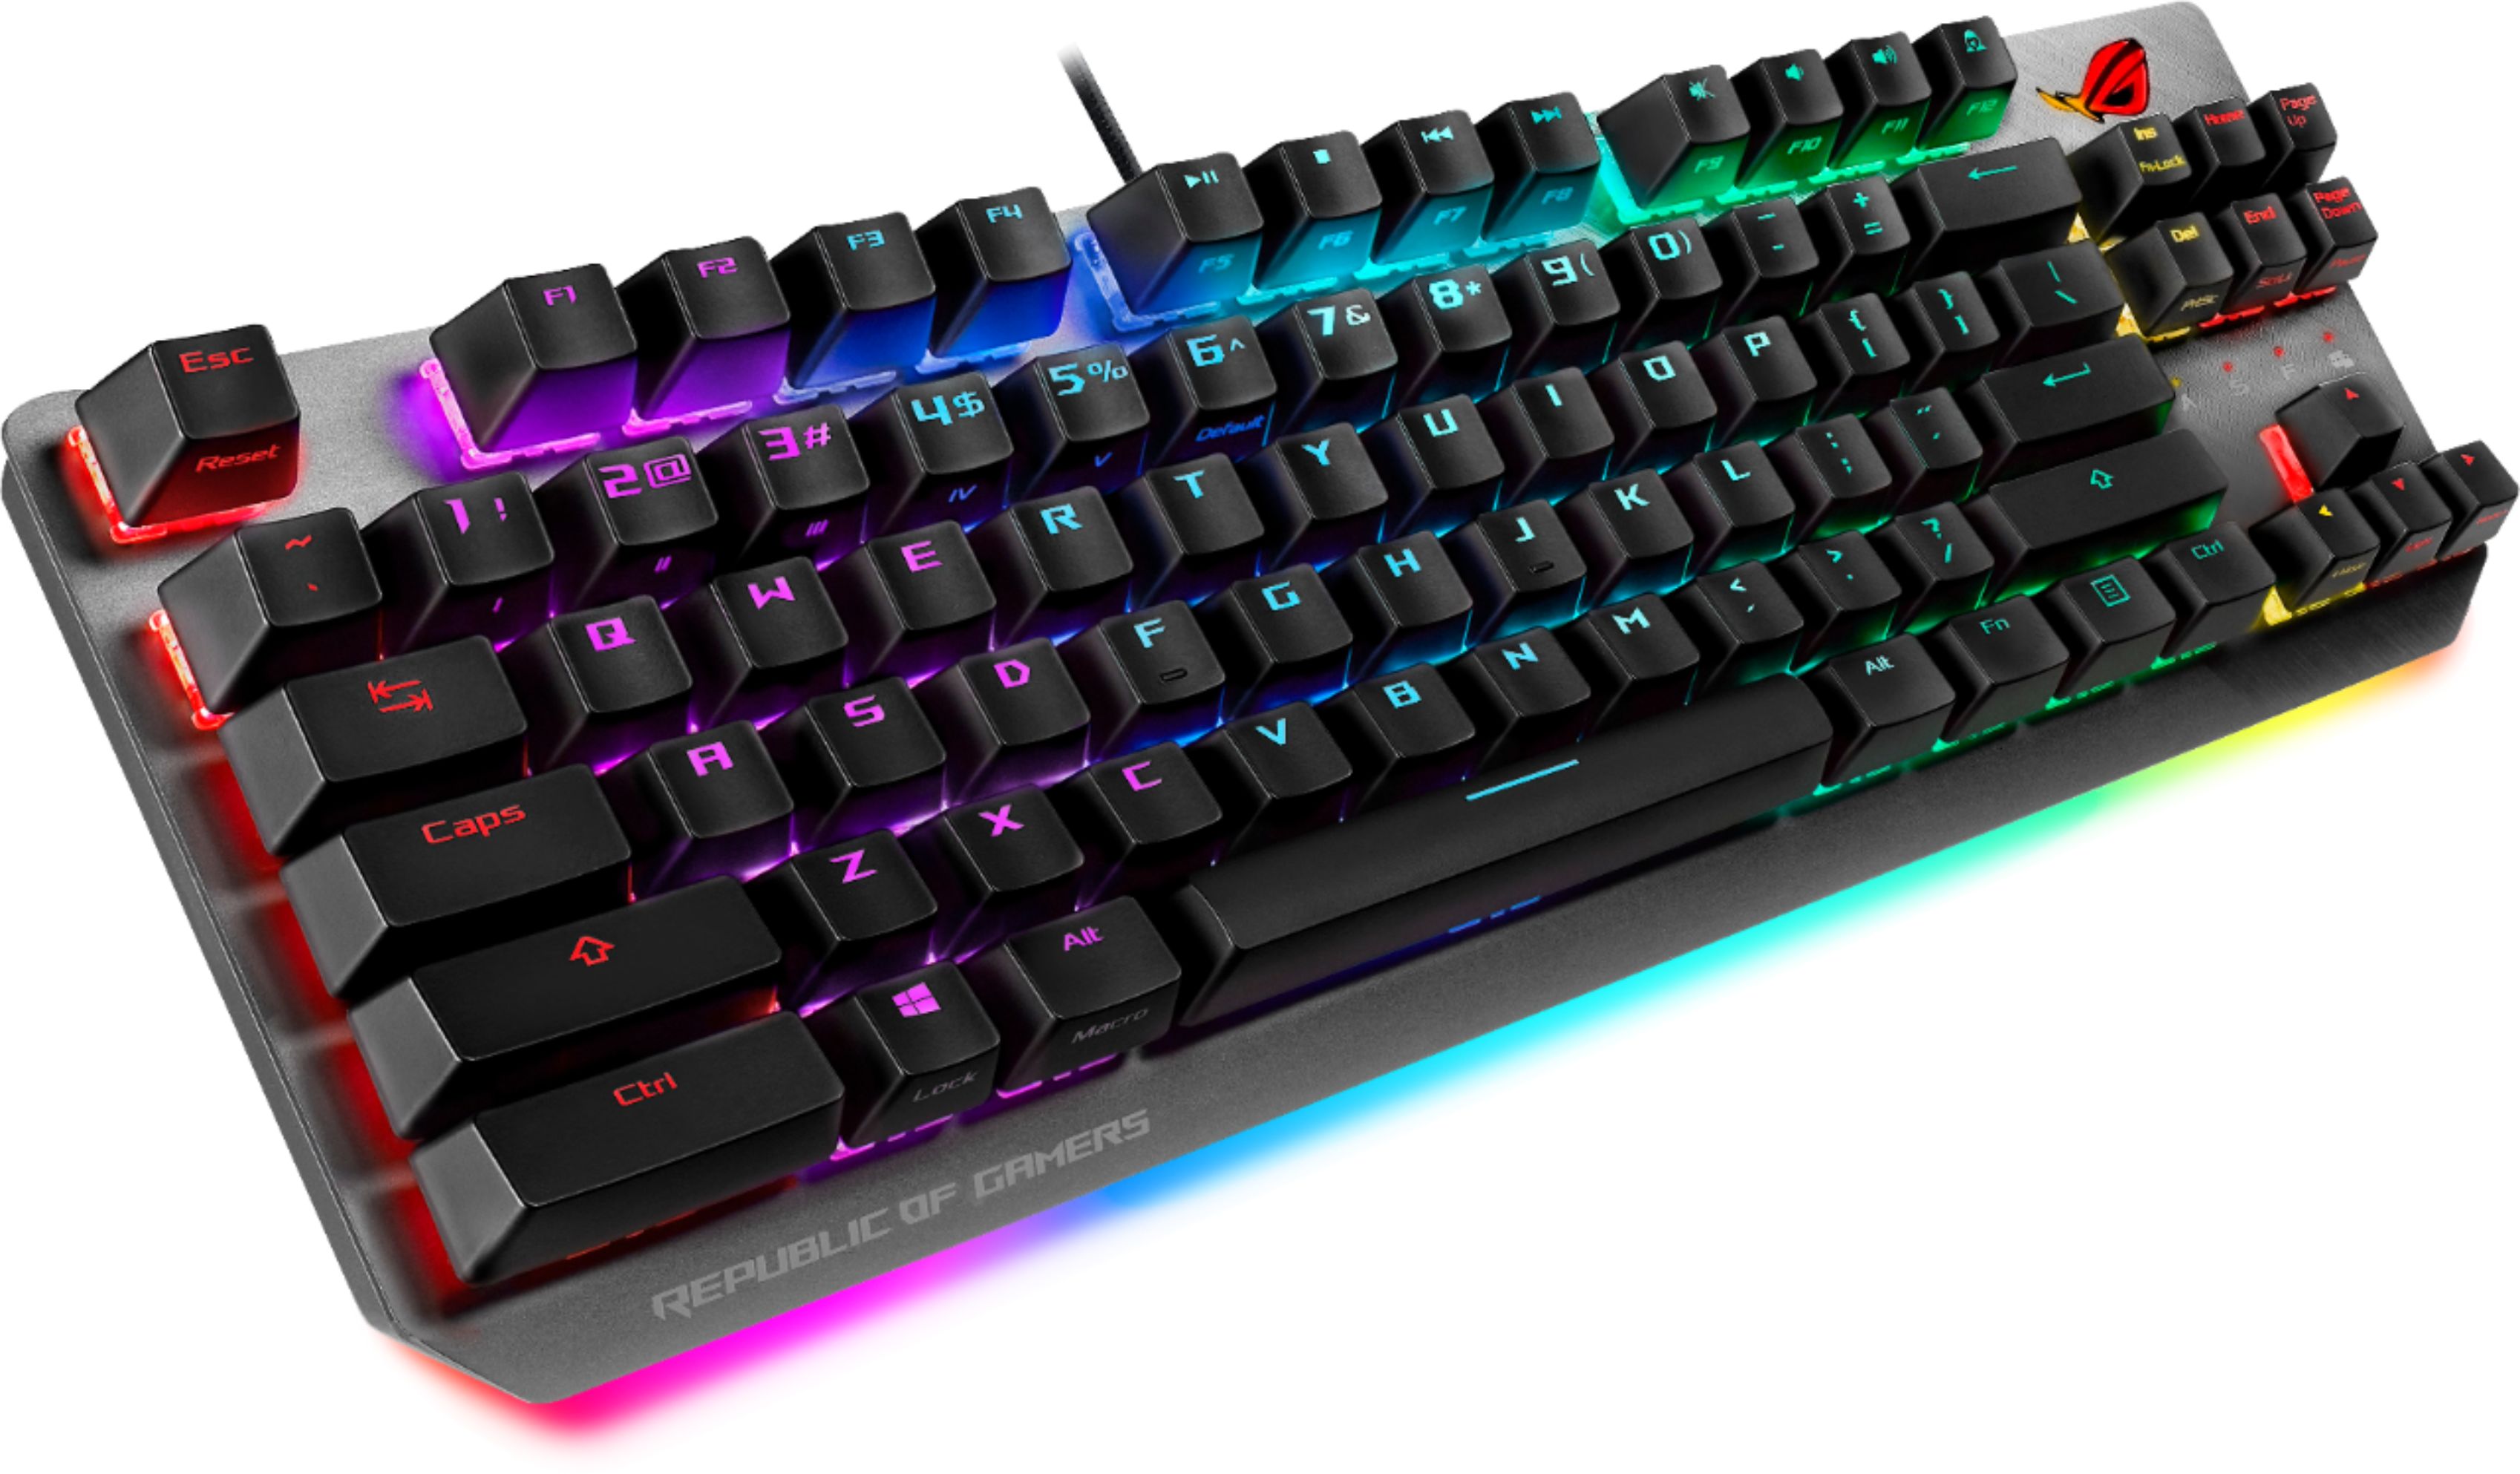 2X Wider Ctrl Key for FPS Precision ASUS RGB Mechanical Gaming Keyboard Cherry MX Brown Switches ROG Strix Scope TKL Gaming Keyboard for PC 